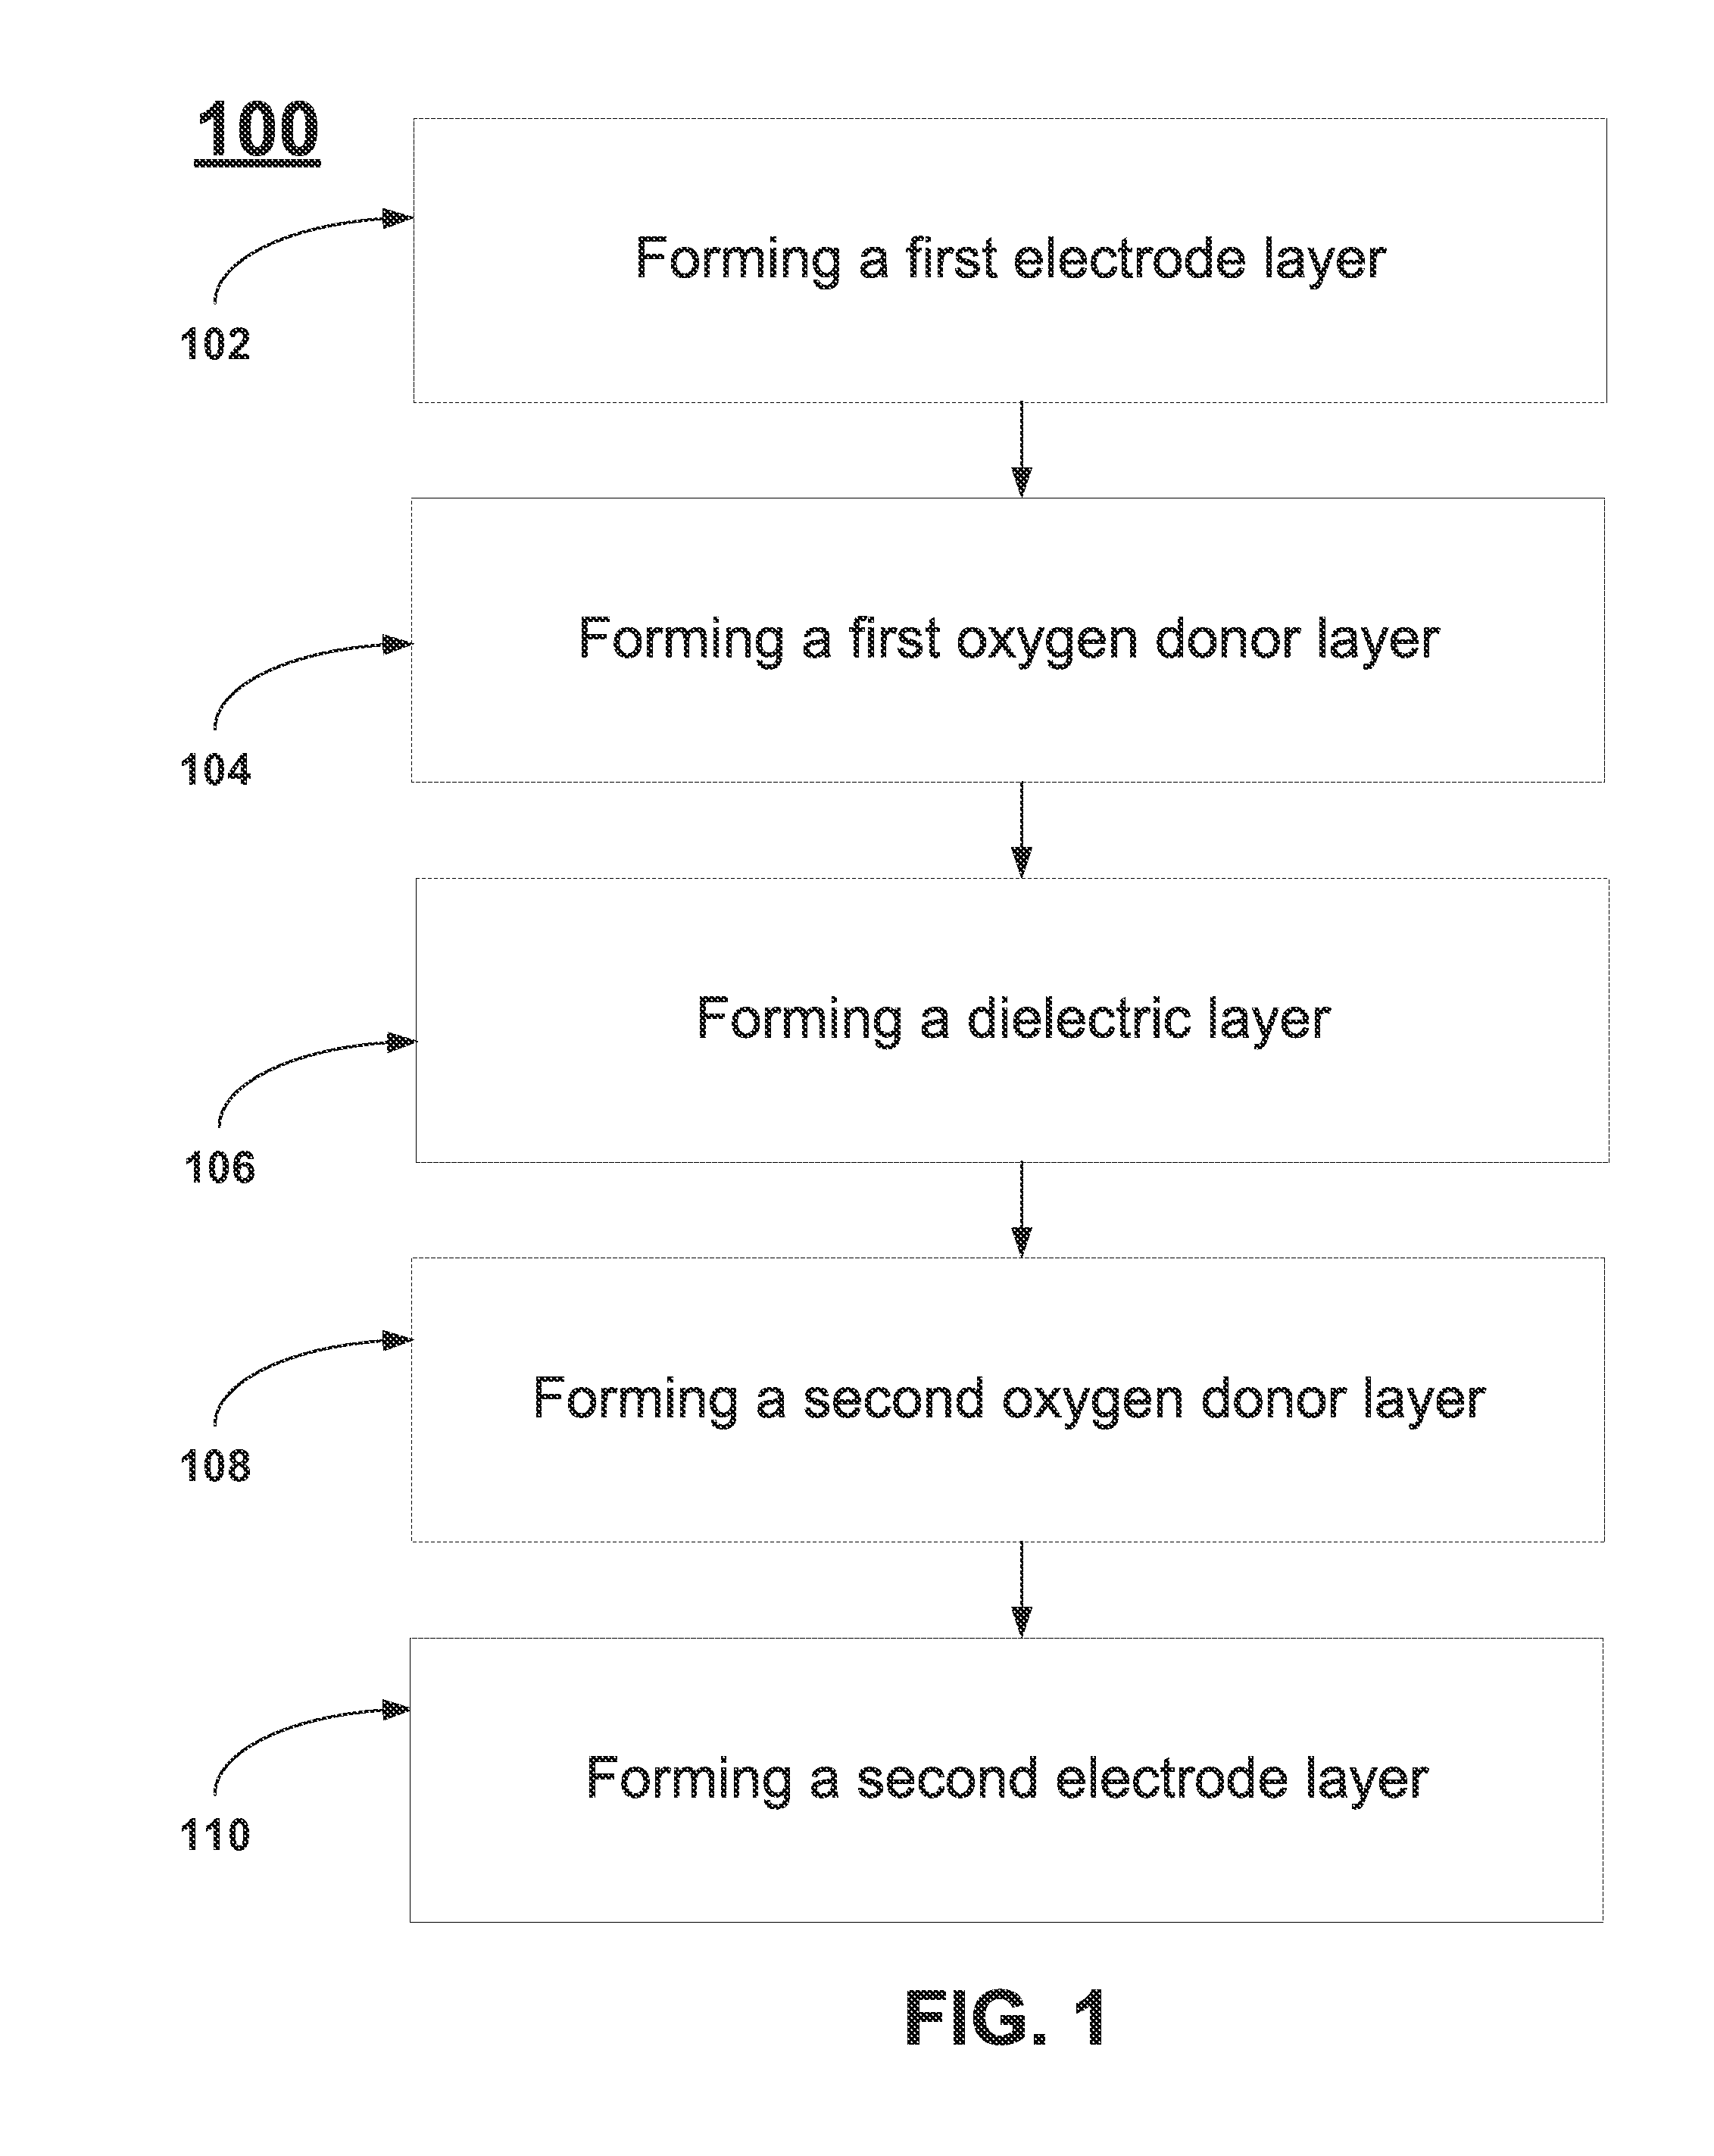 Methods to Improve Leakage of High K Materials